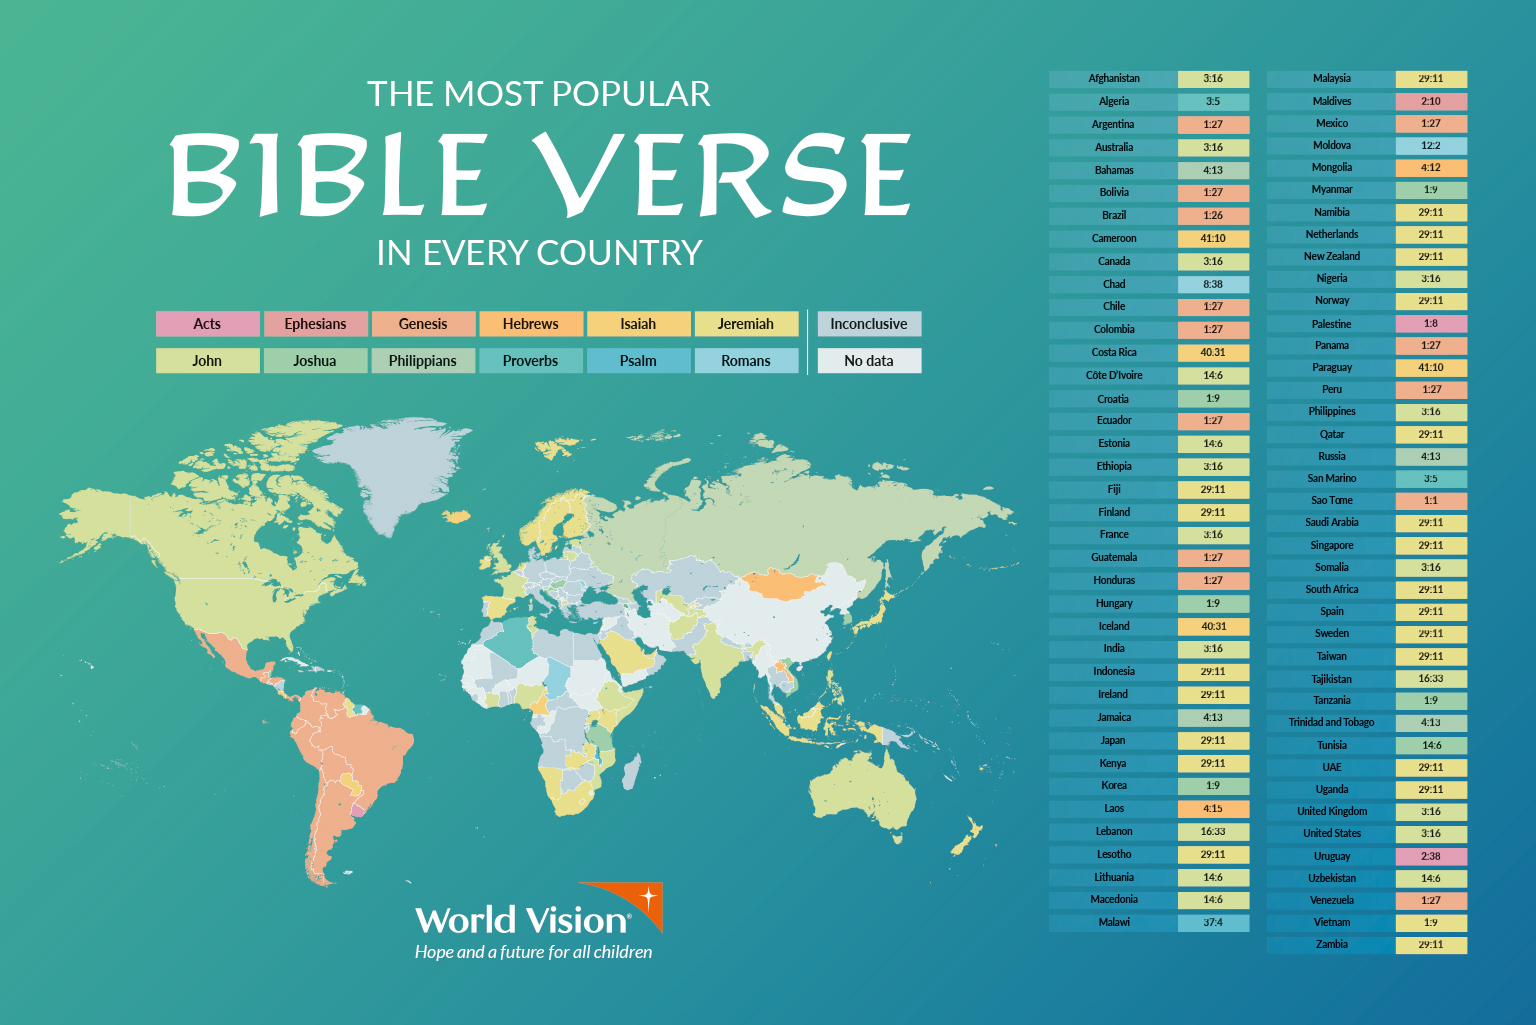 https://www.worldvision.org.uk/media/o3jfm4n5/reworked-the-most-popular-bible-verses-infographic-by-world-vision.jpg